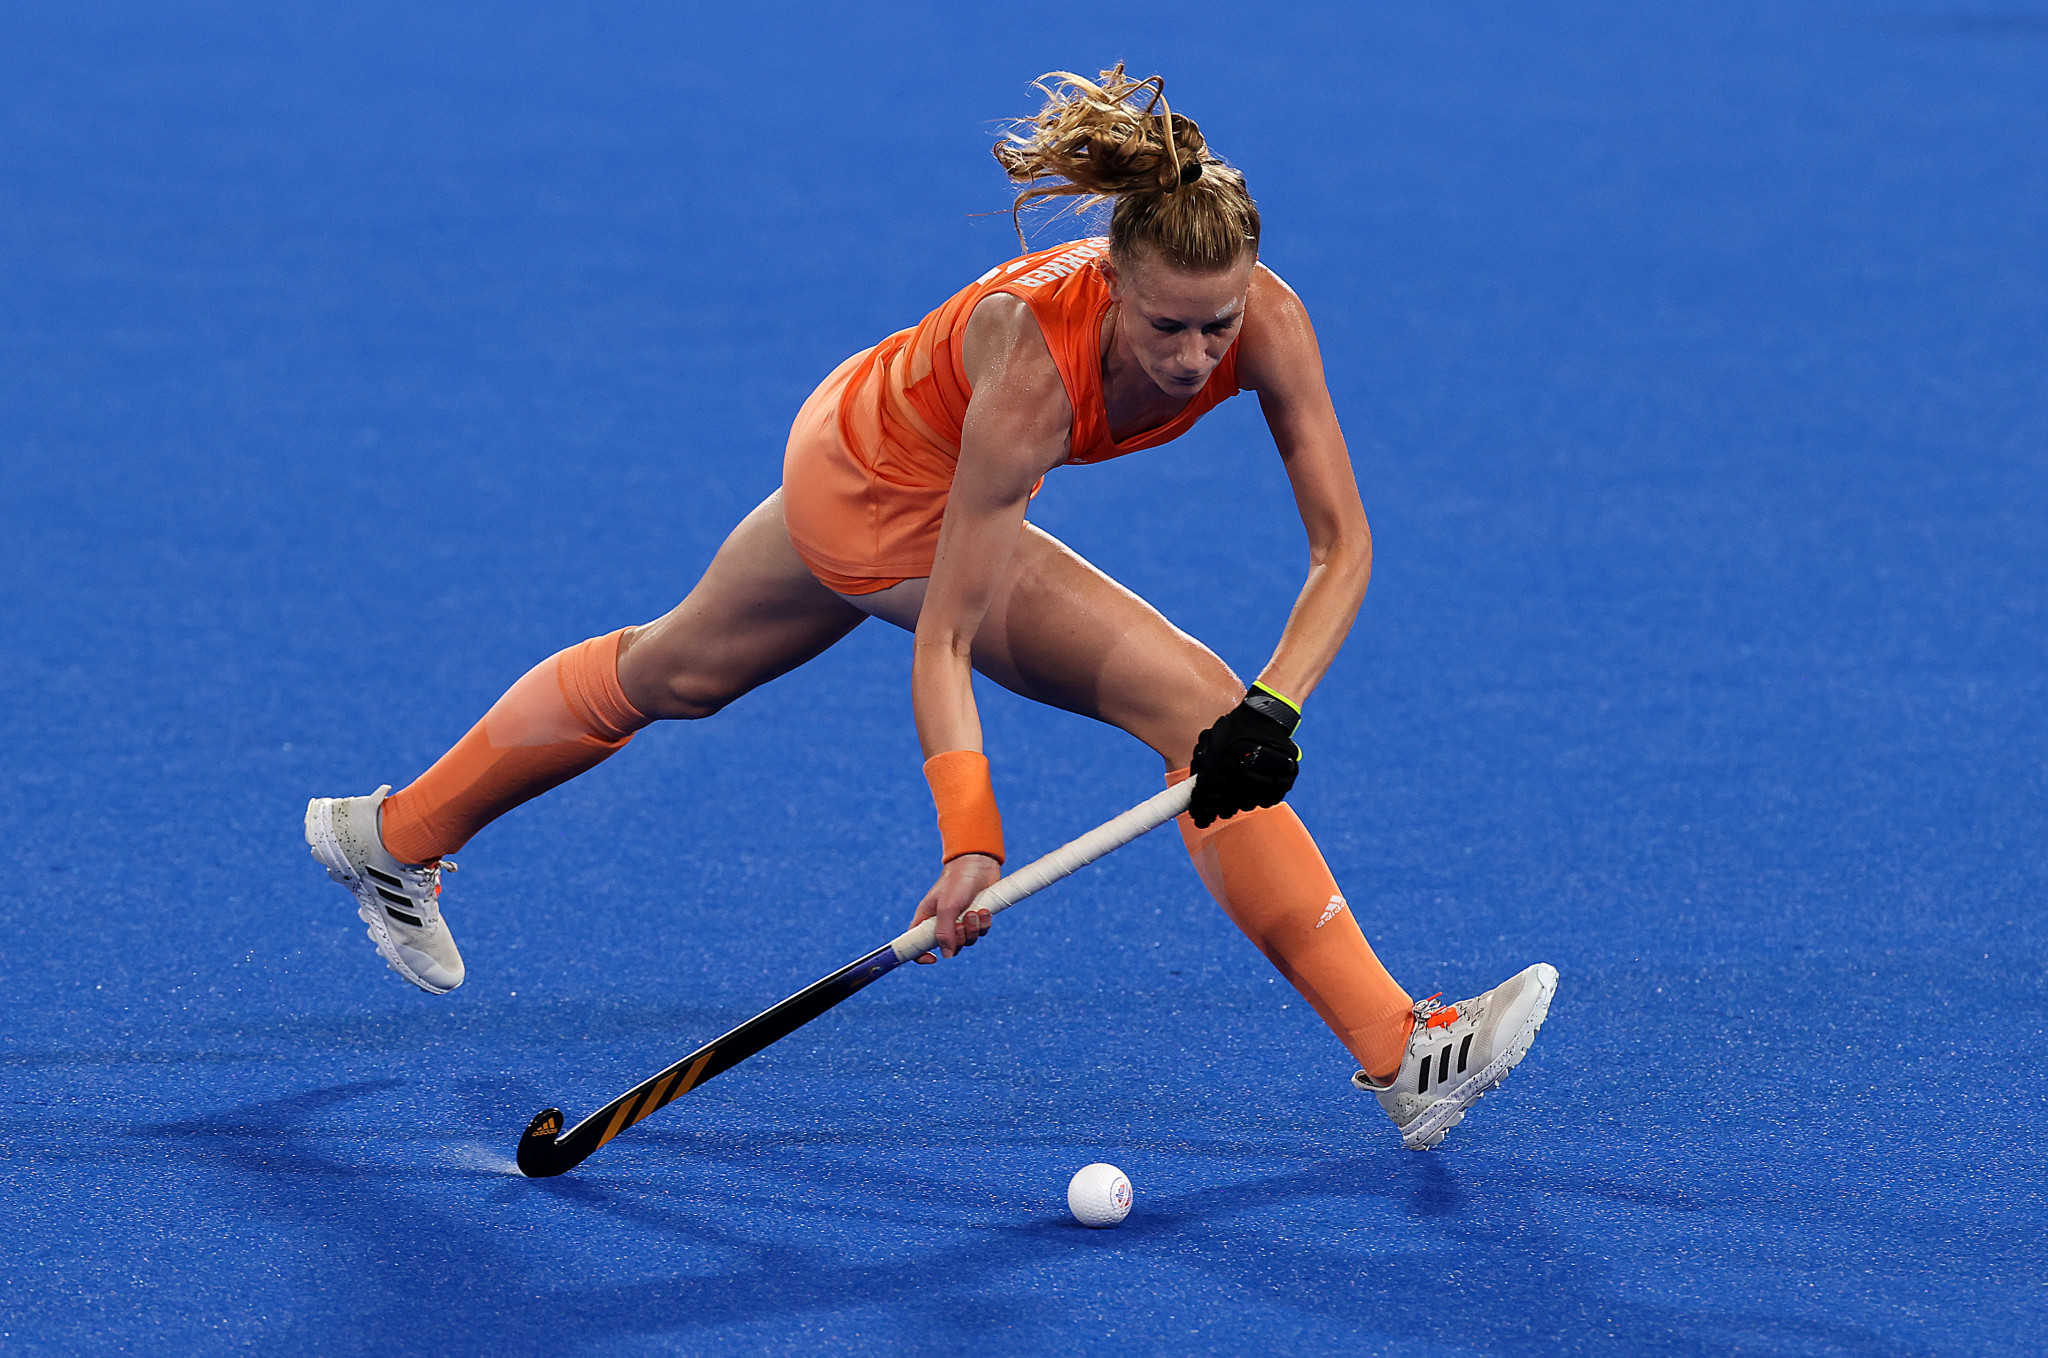 Dutch bounce back with shootout victory against India in FIH Pro League